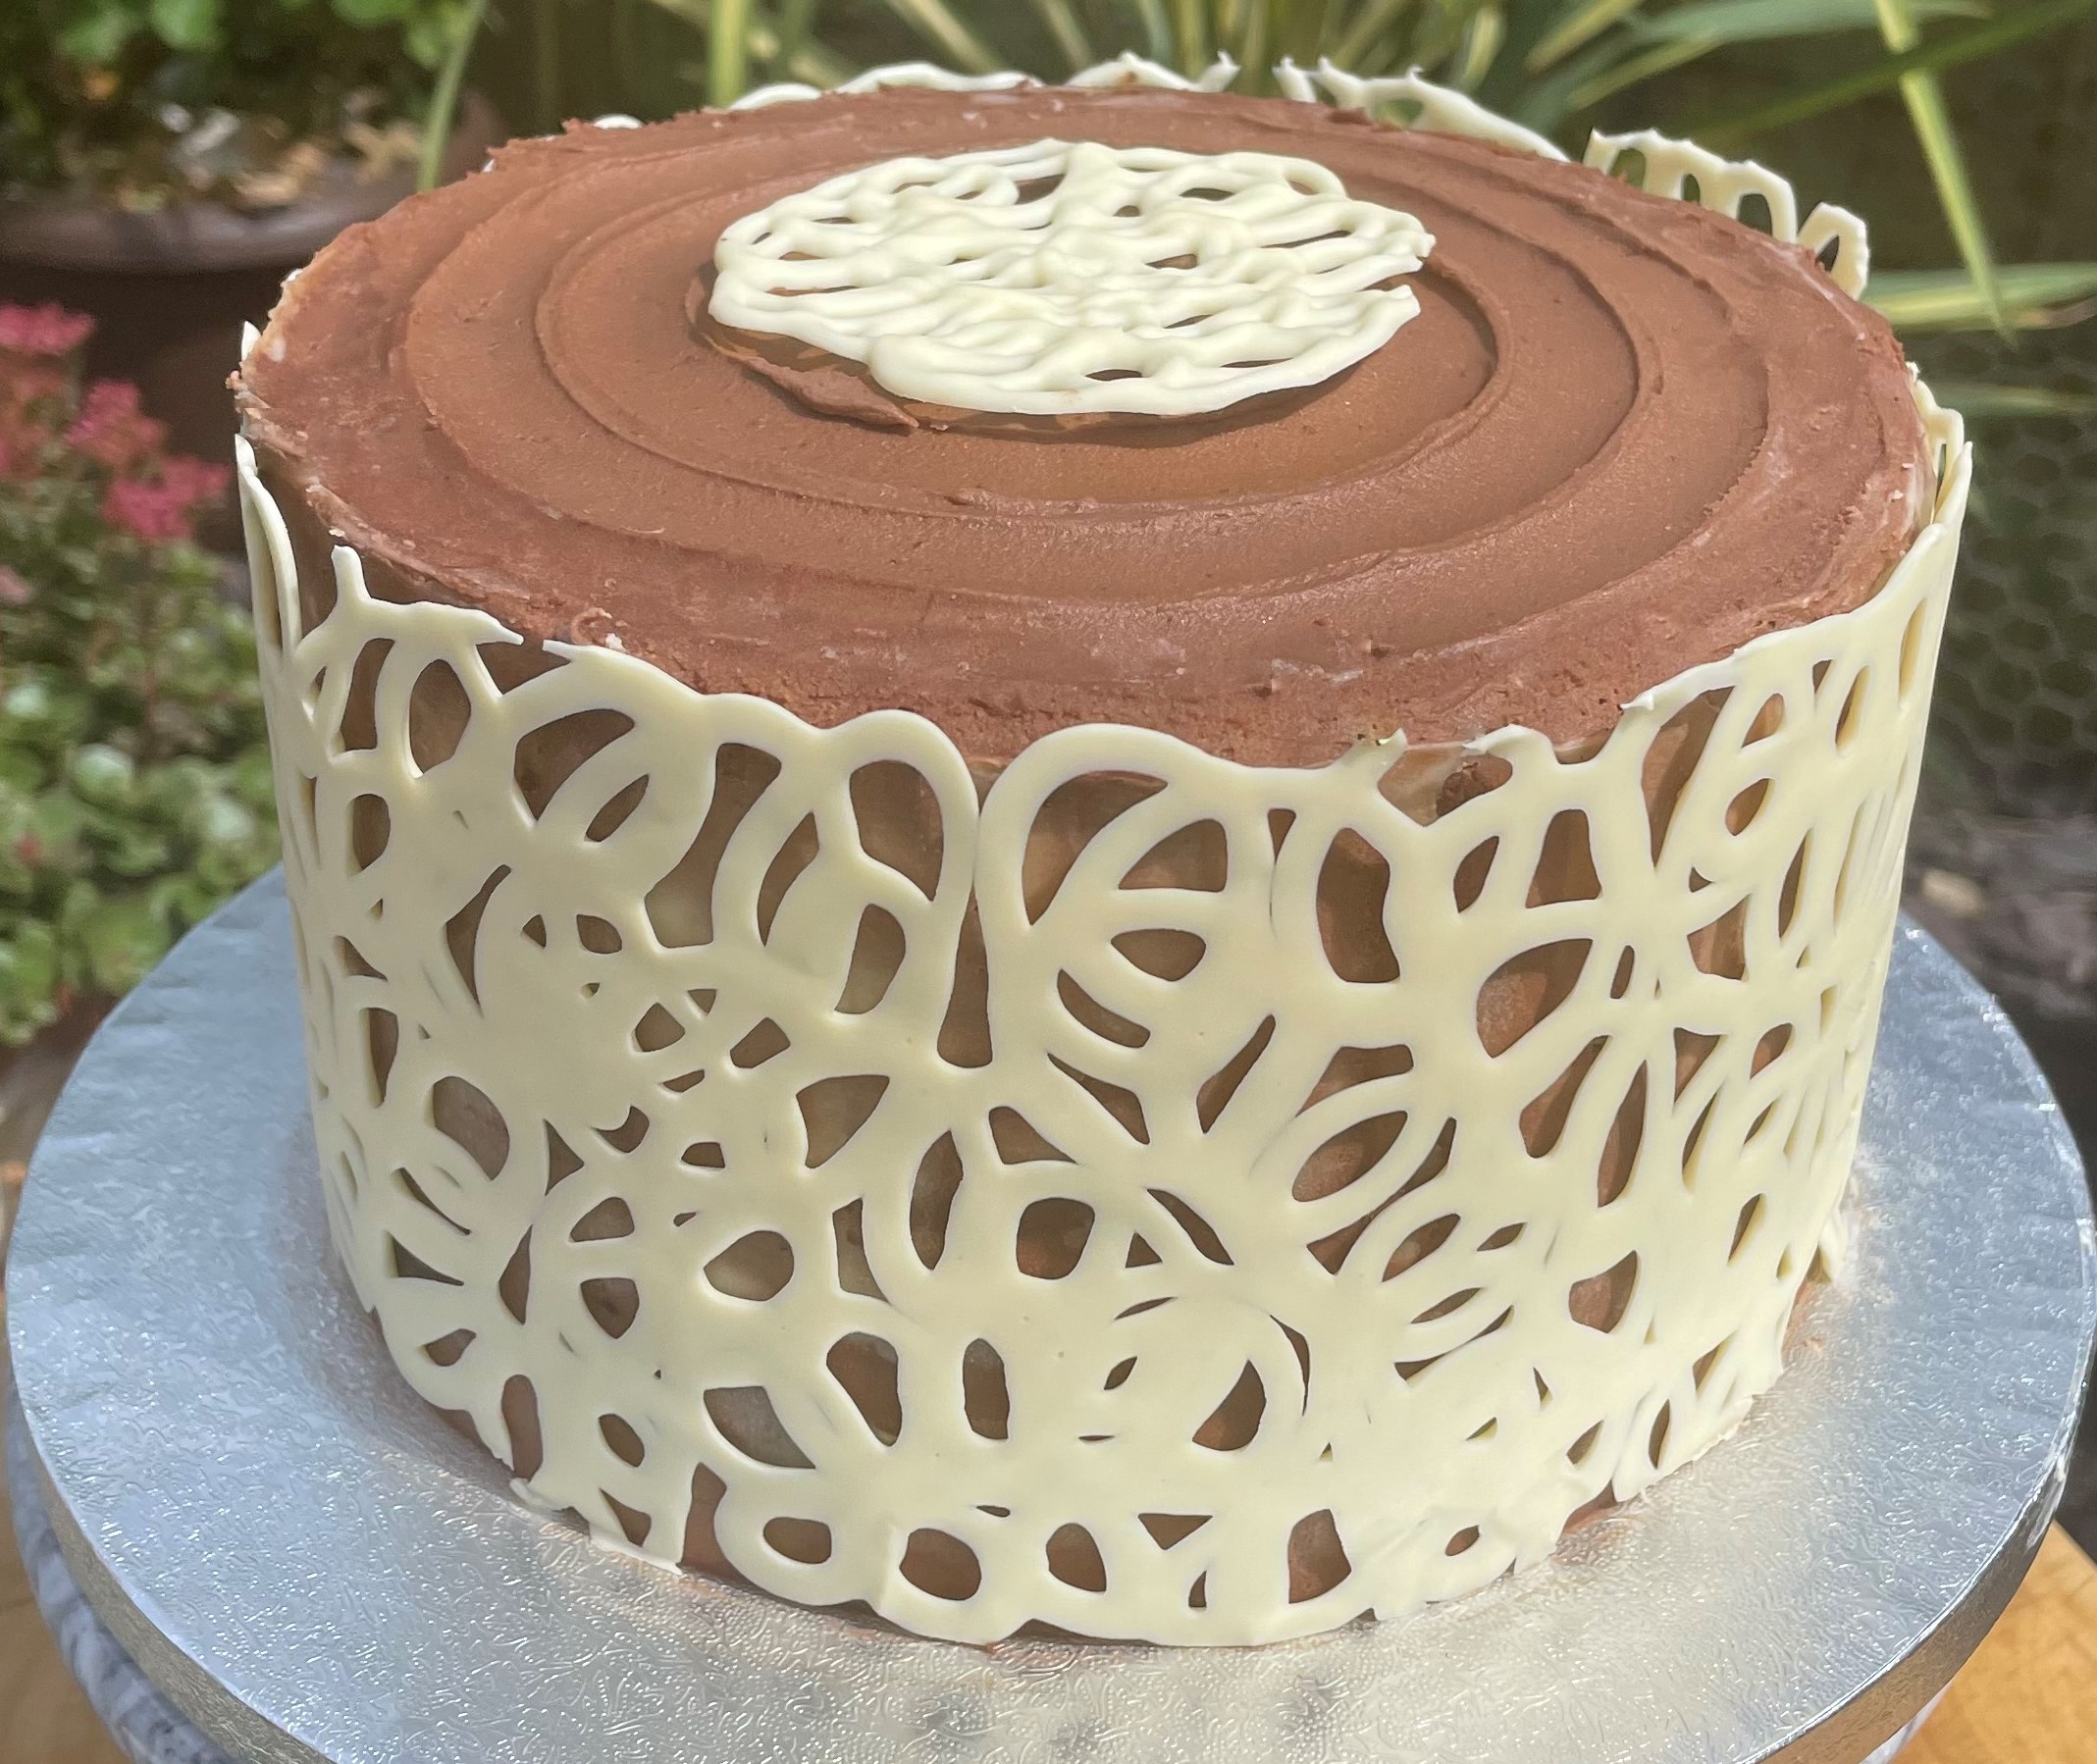 C - Chocolate Cake with Spotted Chocolate Collar - Ribbons to Pastas